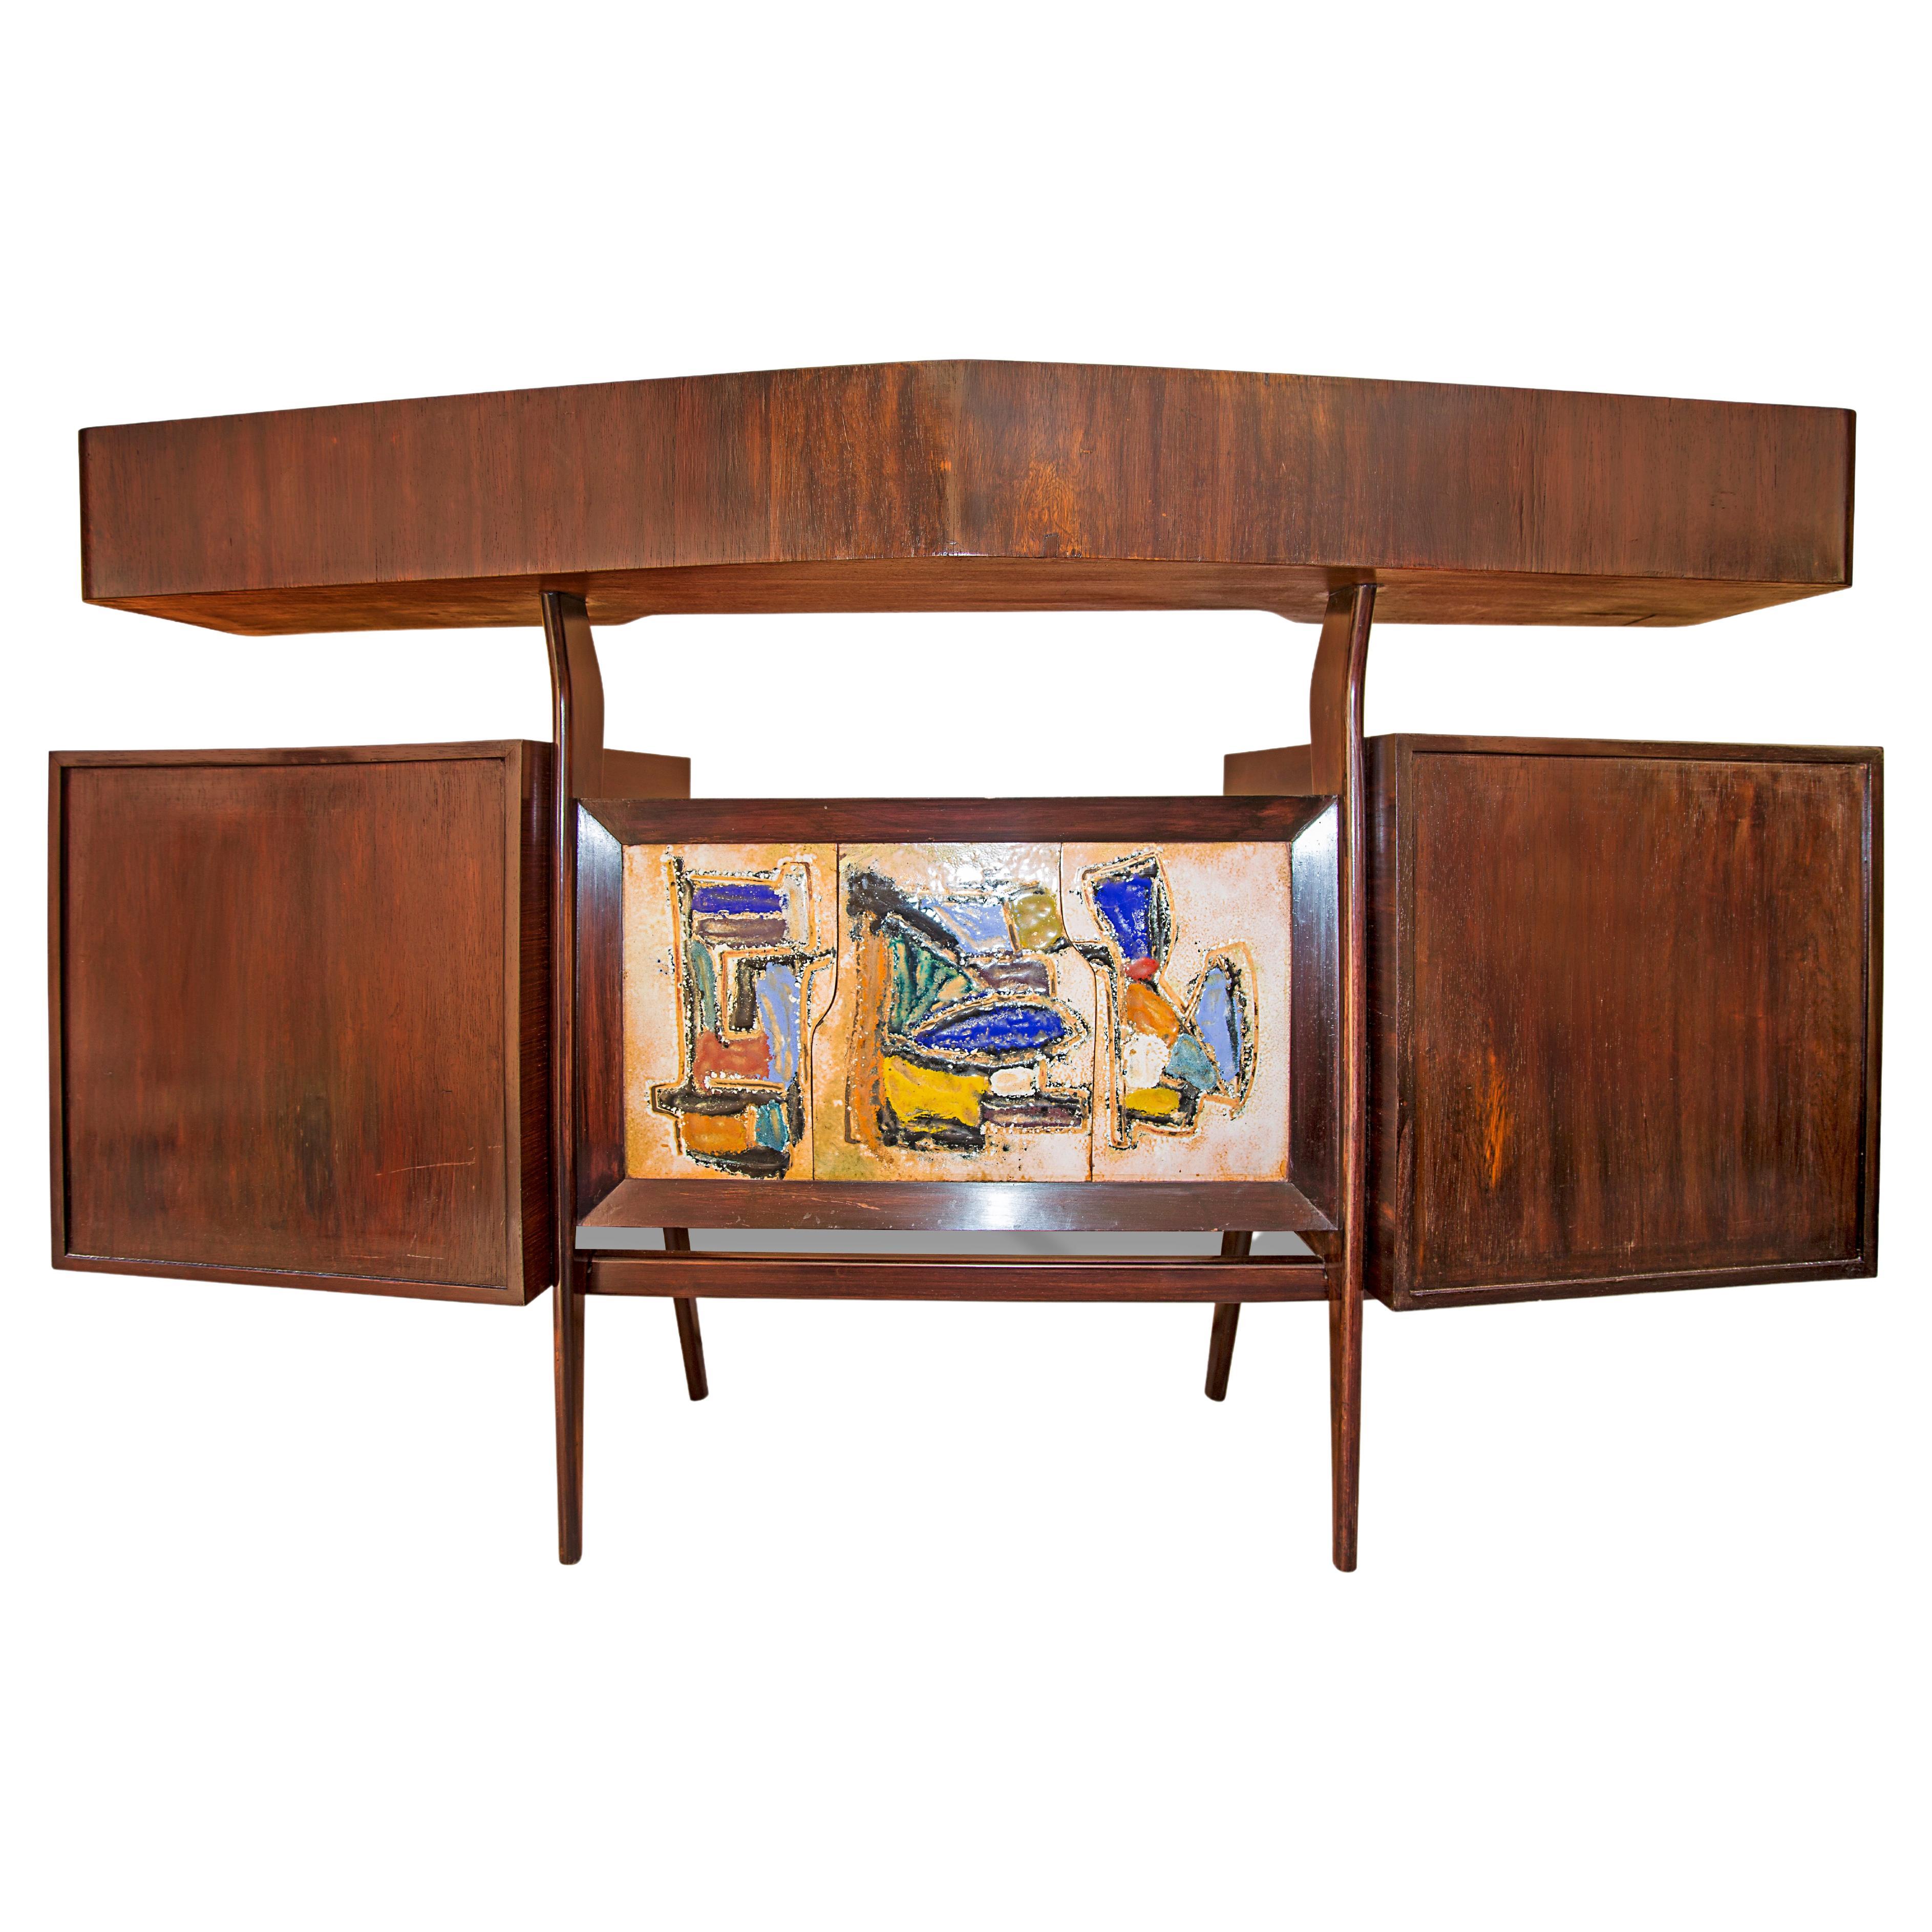 Available today, this magnificent Mid-Century Modern, hand painted bar made in Brazilian Rosewood, known as Jacaranda, by Giuseppe Scapinelli in the 1950s is truly a masterpiece!

The bar is made in Rosewood and consists of two cabinets, three